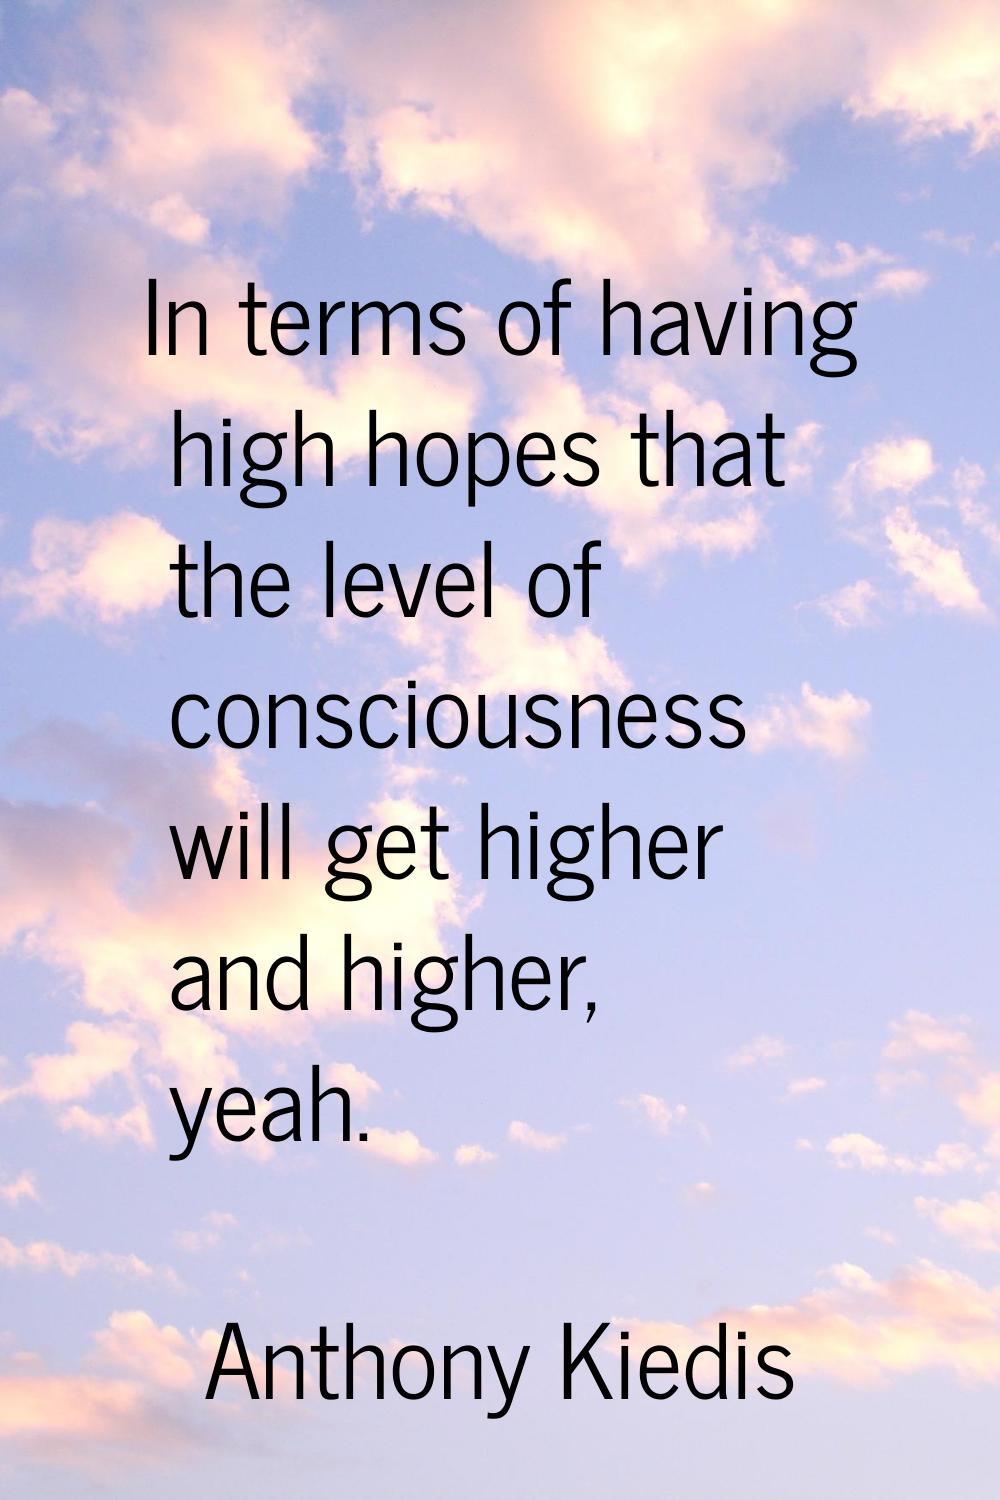 In terms of having high hopes that the level of consciousness will get higher and higher, yeah.